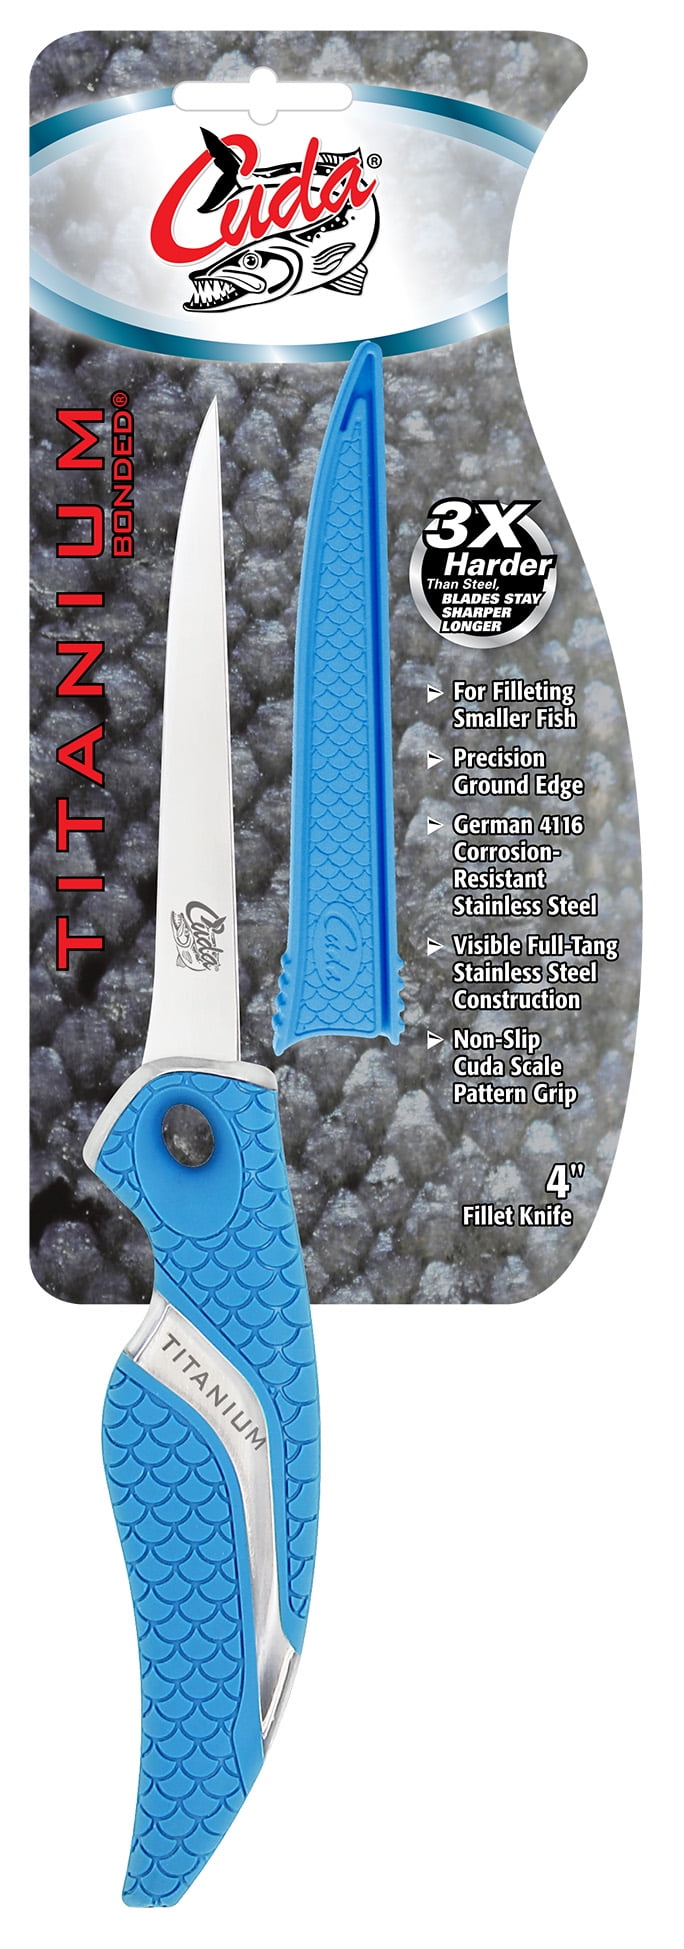 Cuda Fishing Fillet Knife, 4, Titanium Bonded, with Blade Cover, Blue